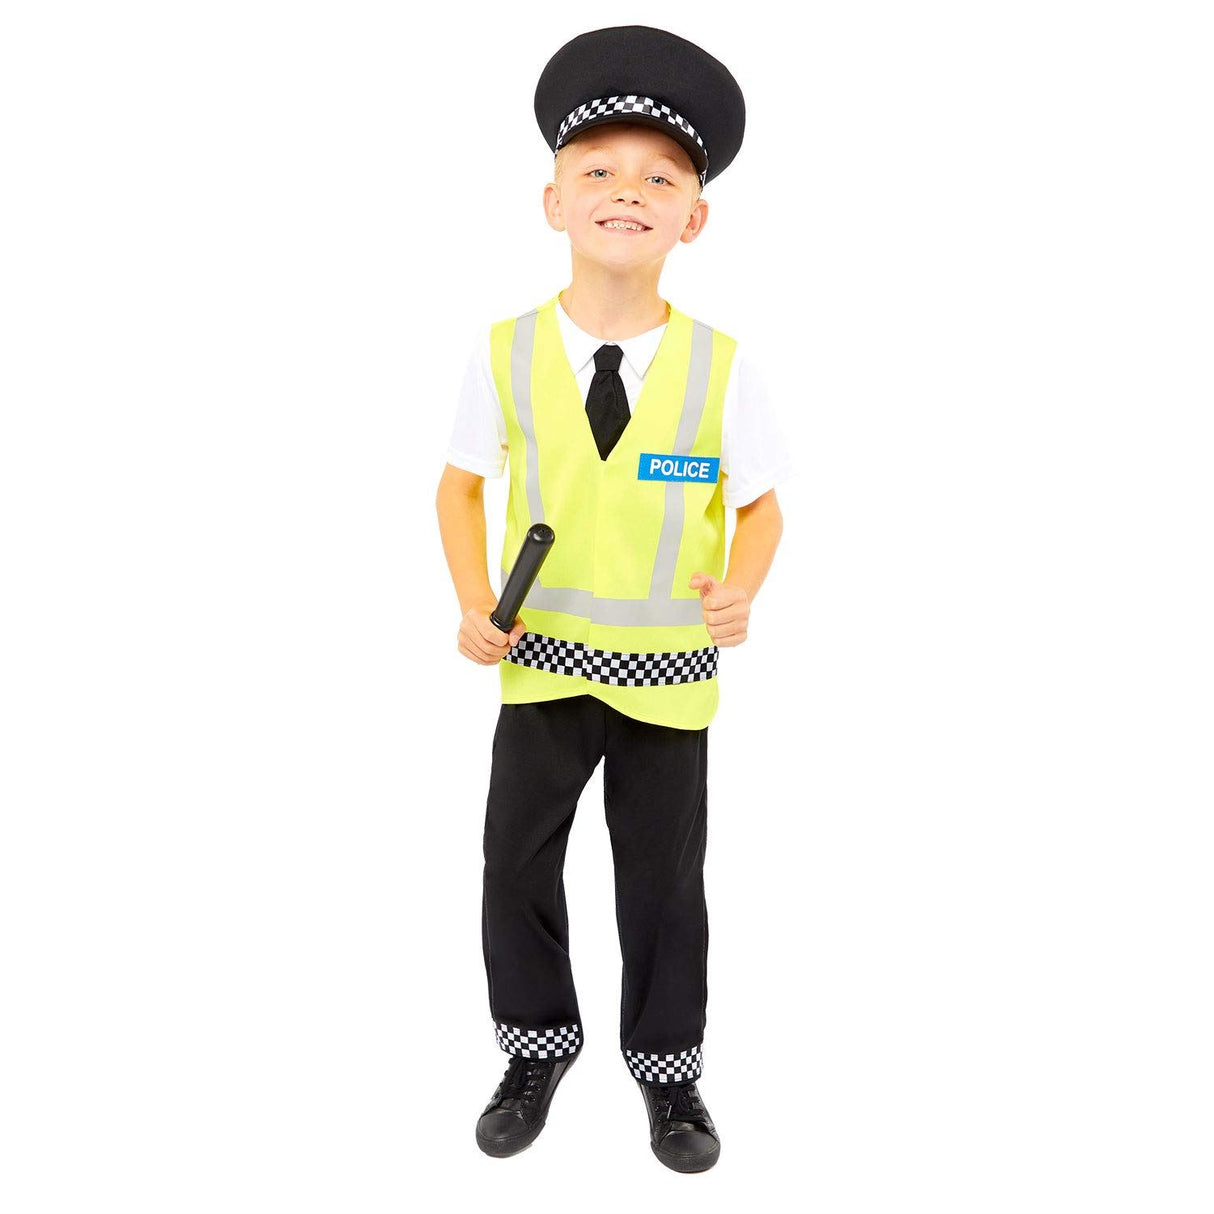 Child UK Police Officer Costume - 6-8 Years